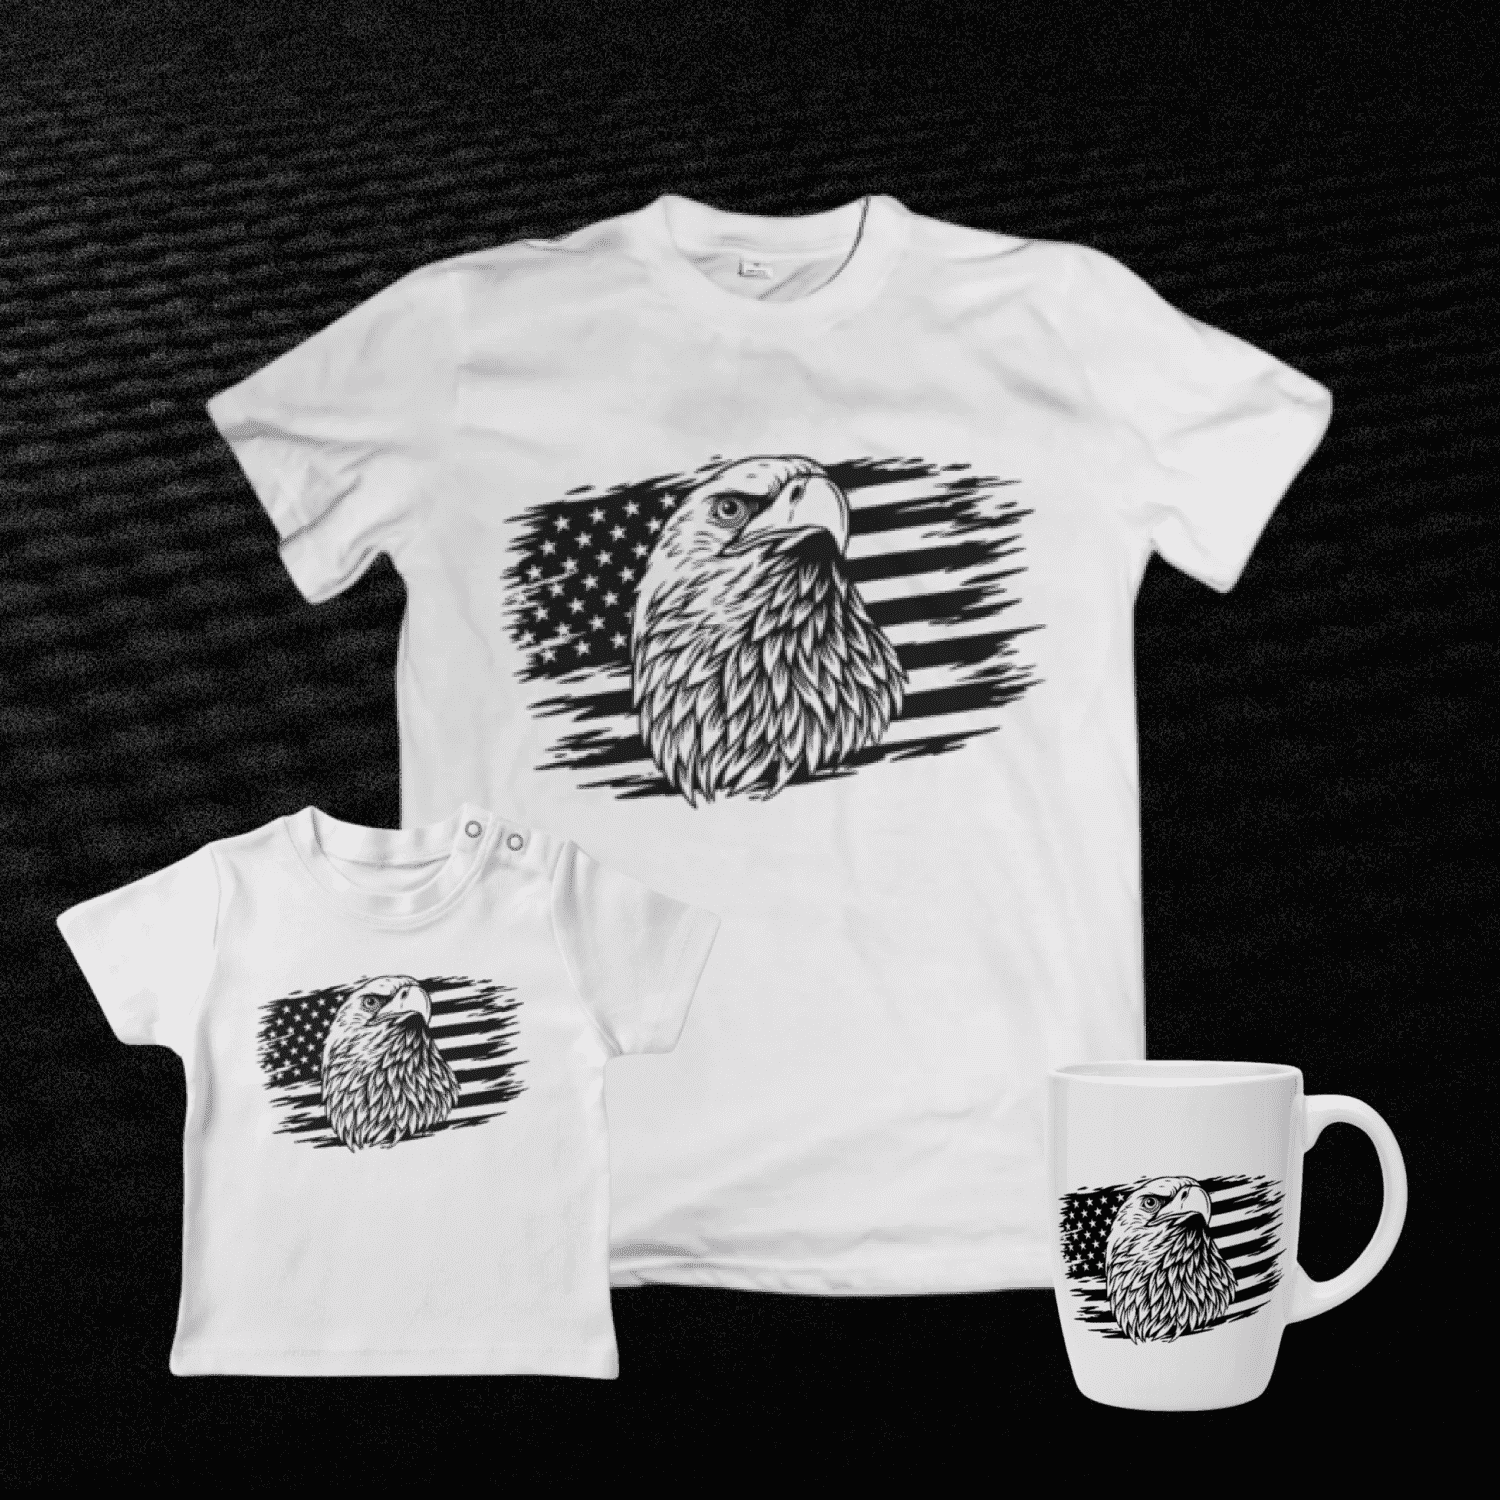 White t - shirt with an eagle on it next to a coffee mug.